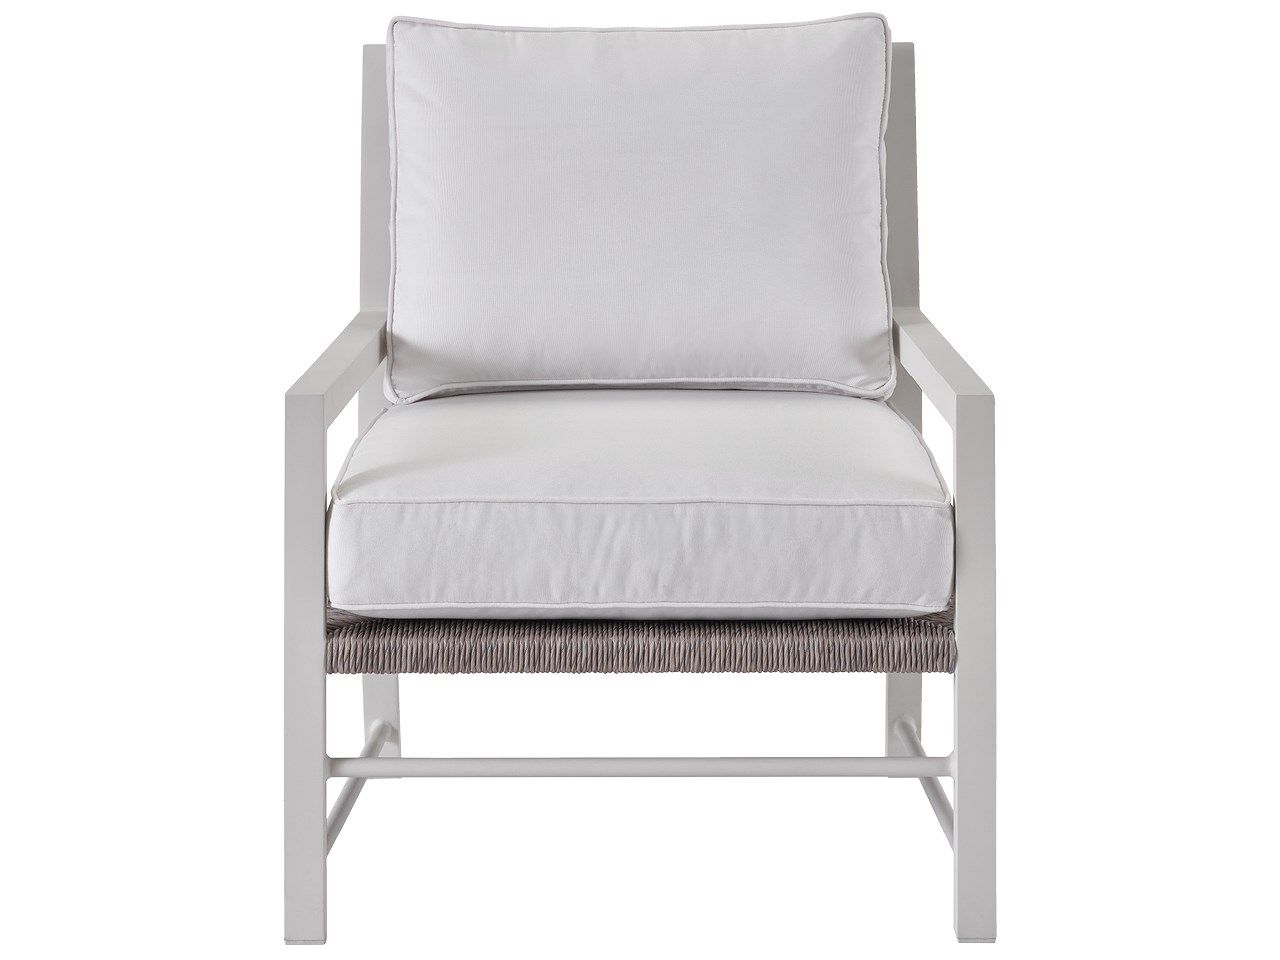 Tybee - Lounge Chair- Special Order - White